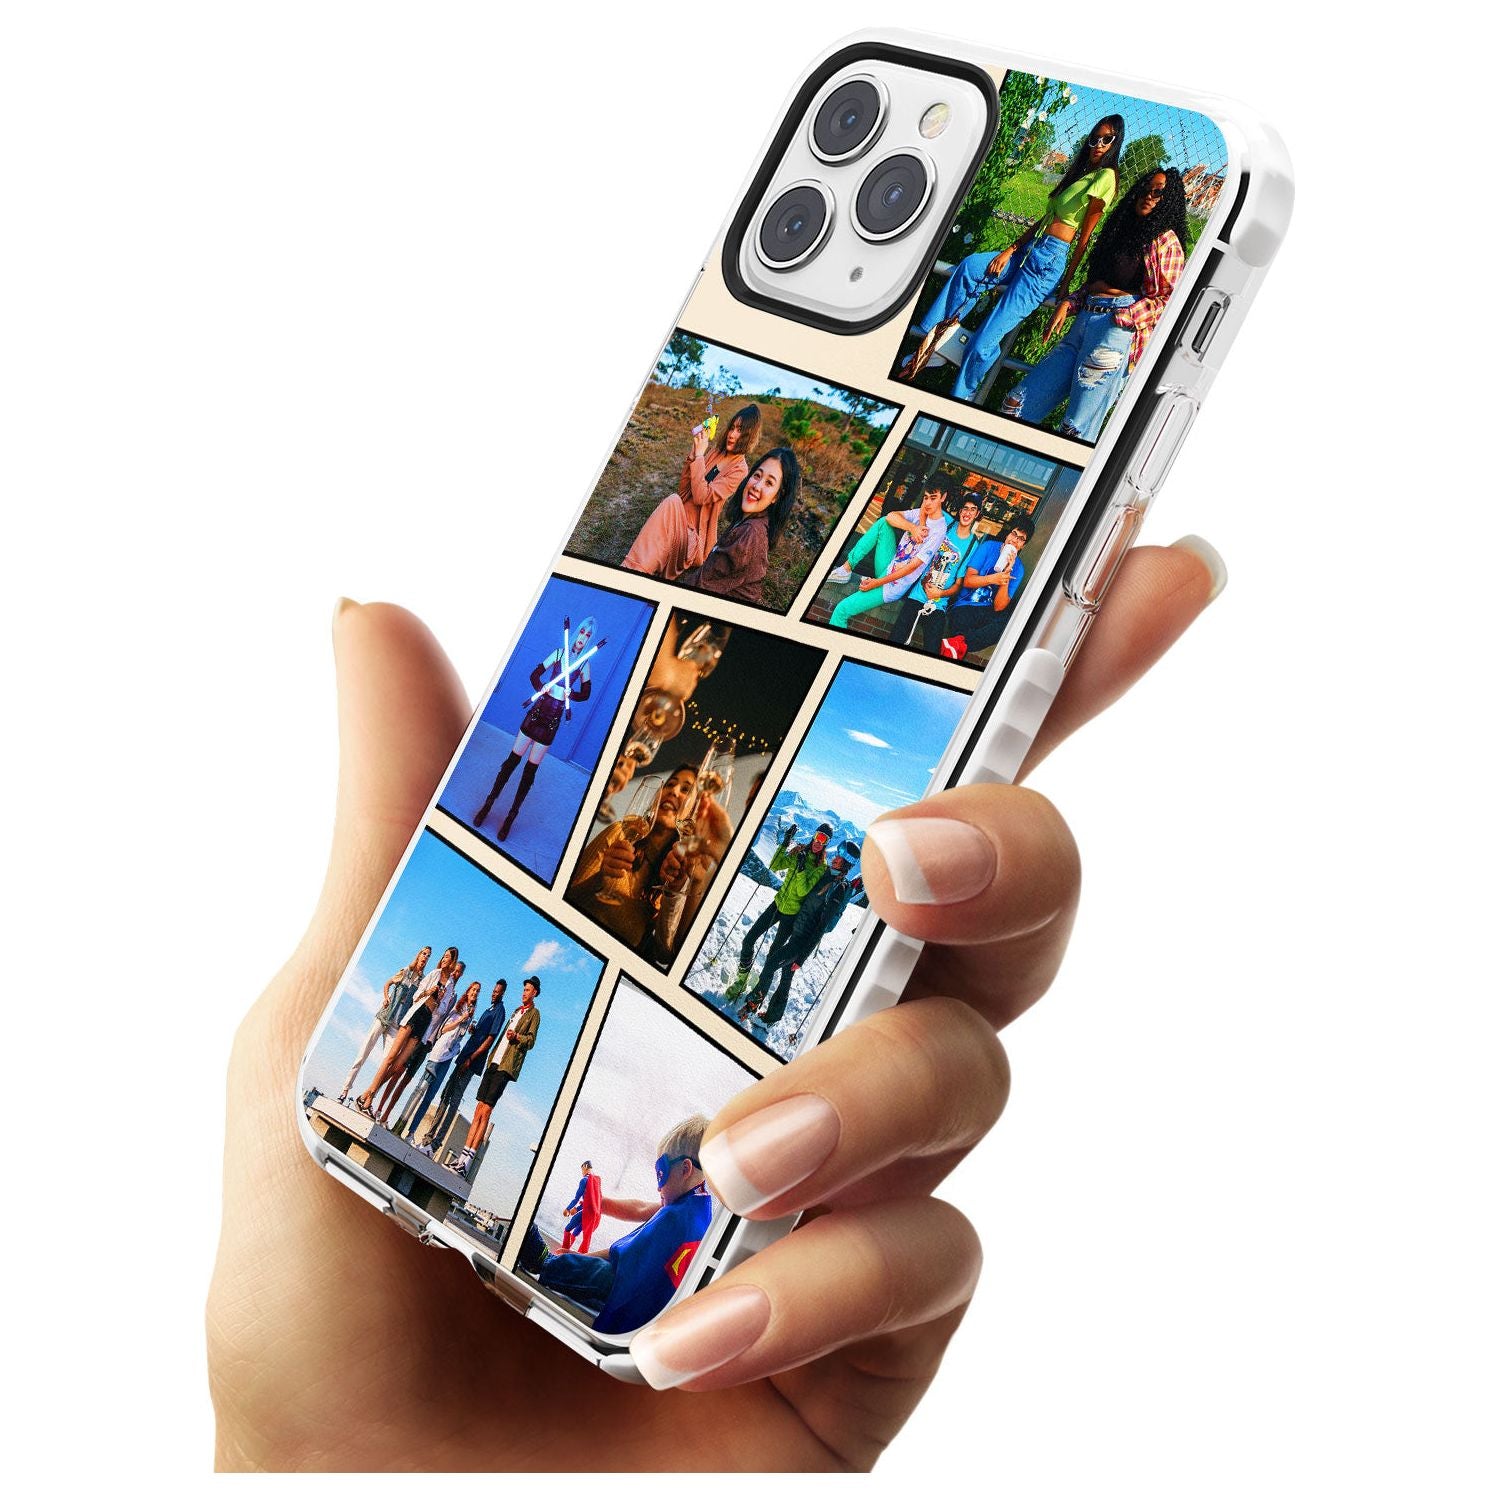 Comic Strip Photo Impact Phone Case for iPhone 11 Pro Max